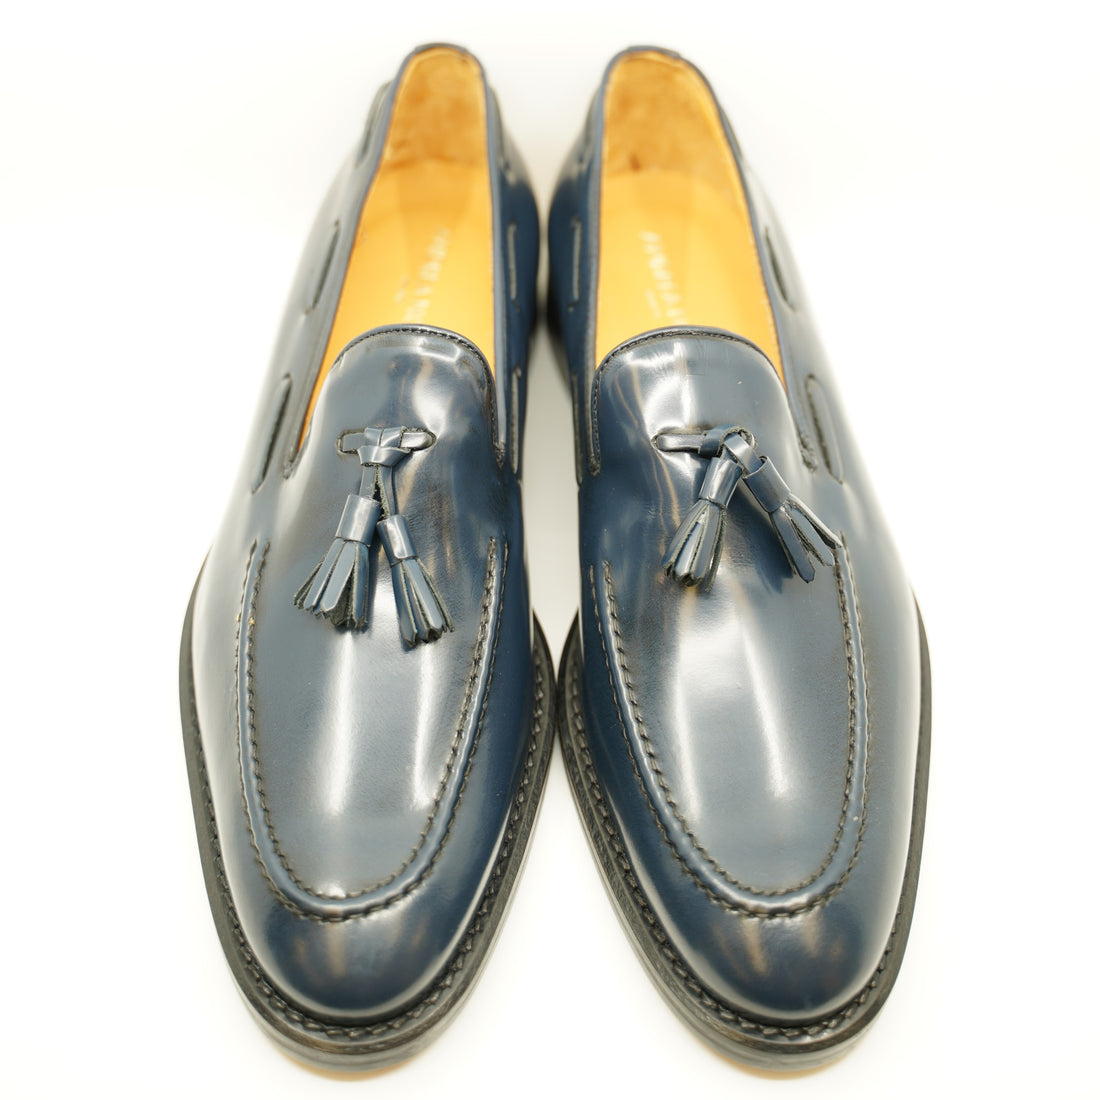 Andrea Nobile - Navy Blue patent leather dress loafer with tassel on in-step